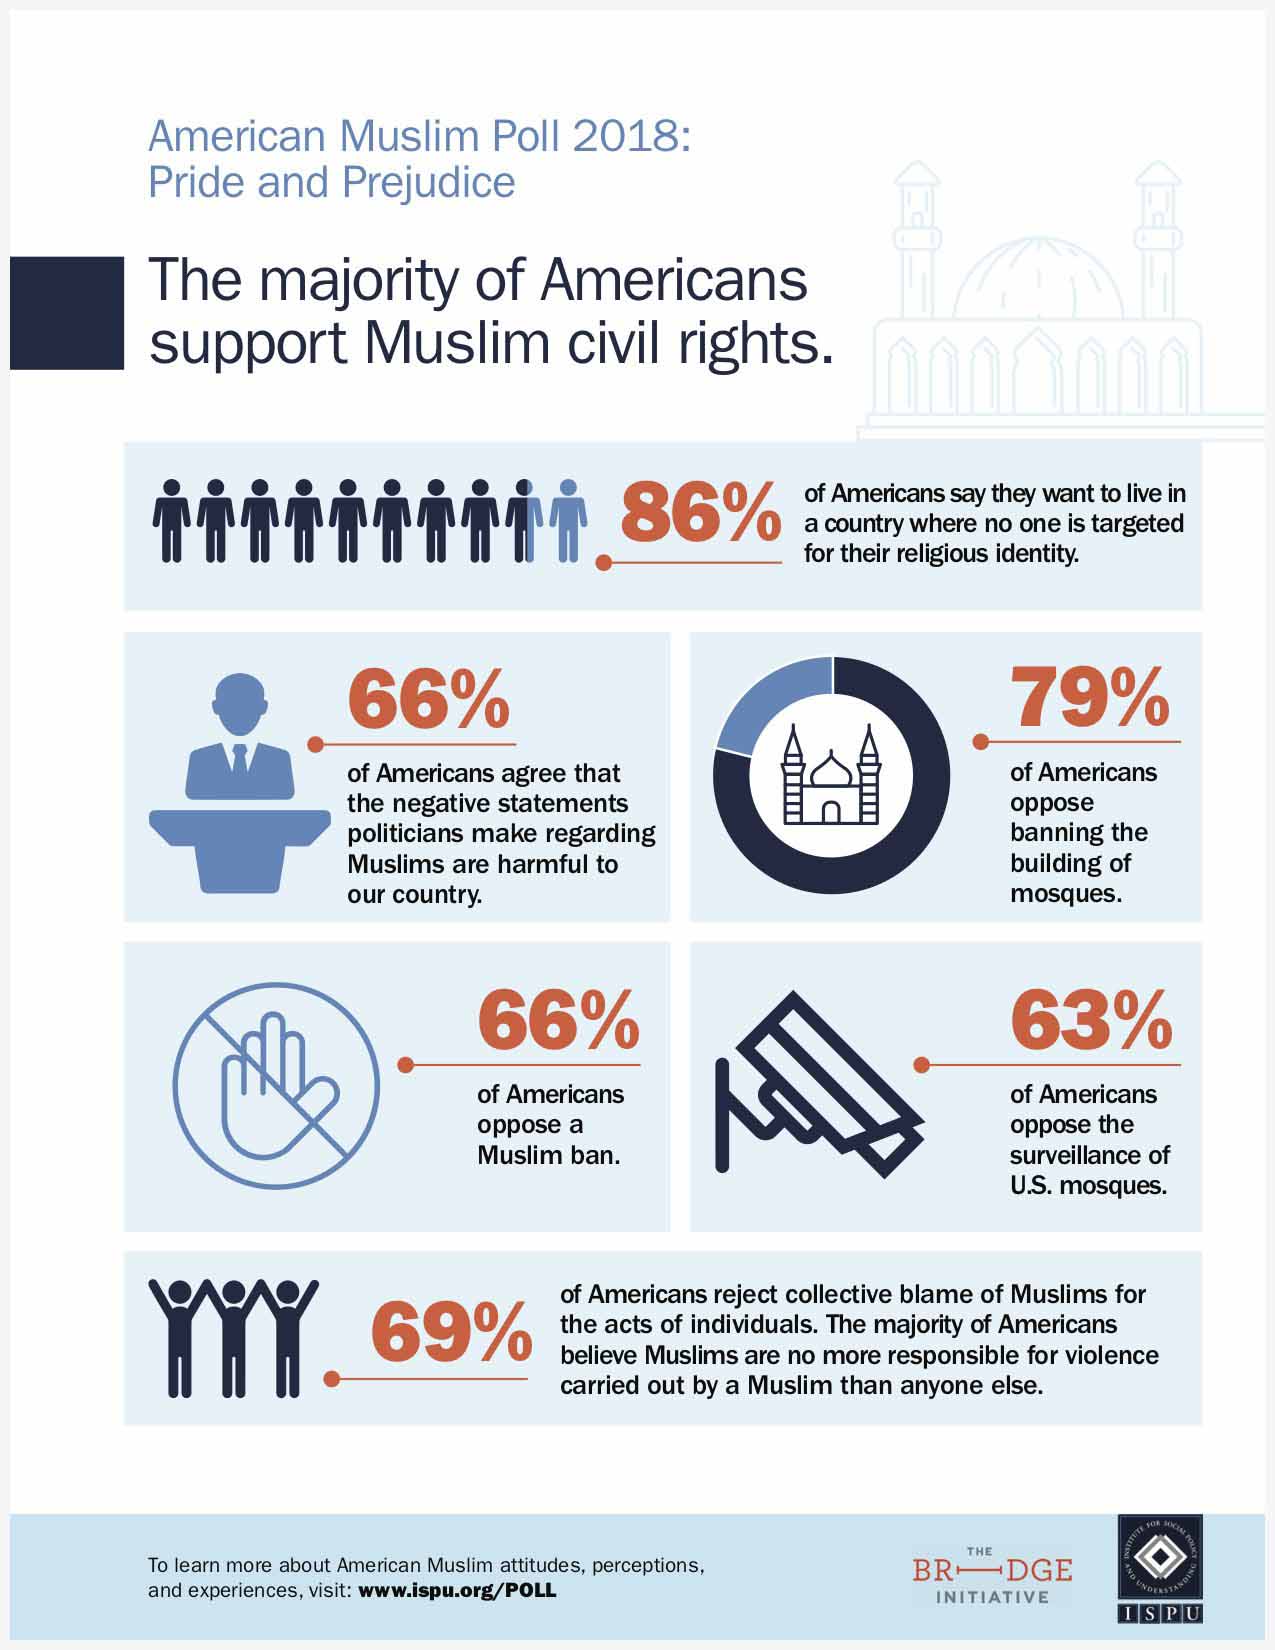 The majority of Americans support Muslim civil rights infographic